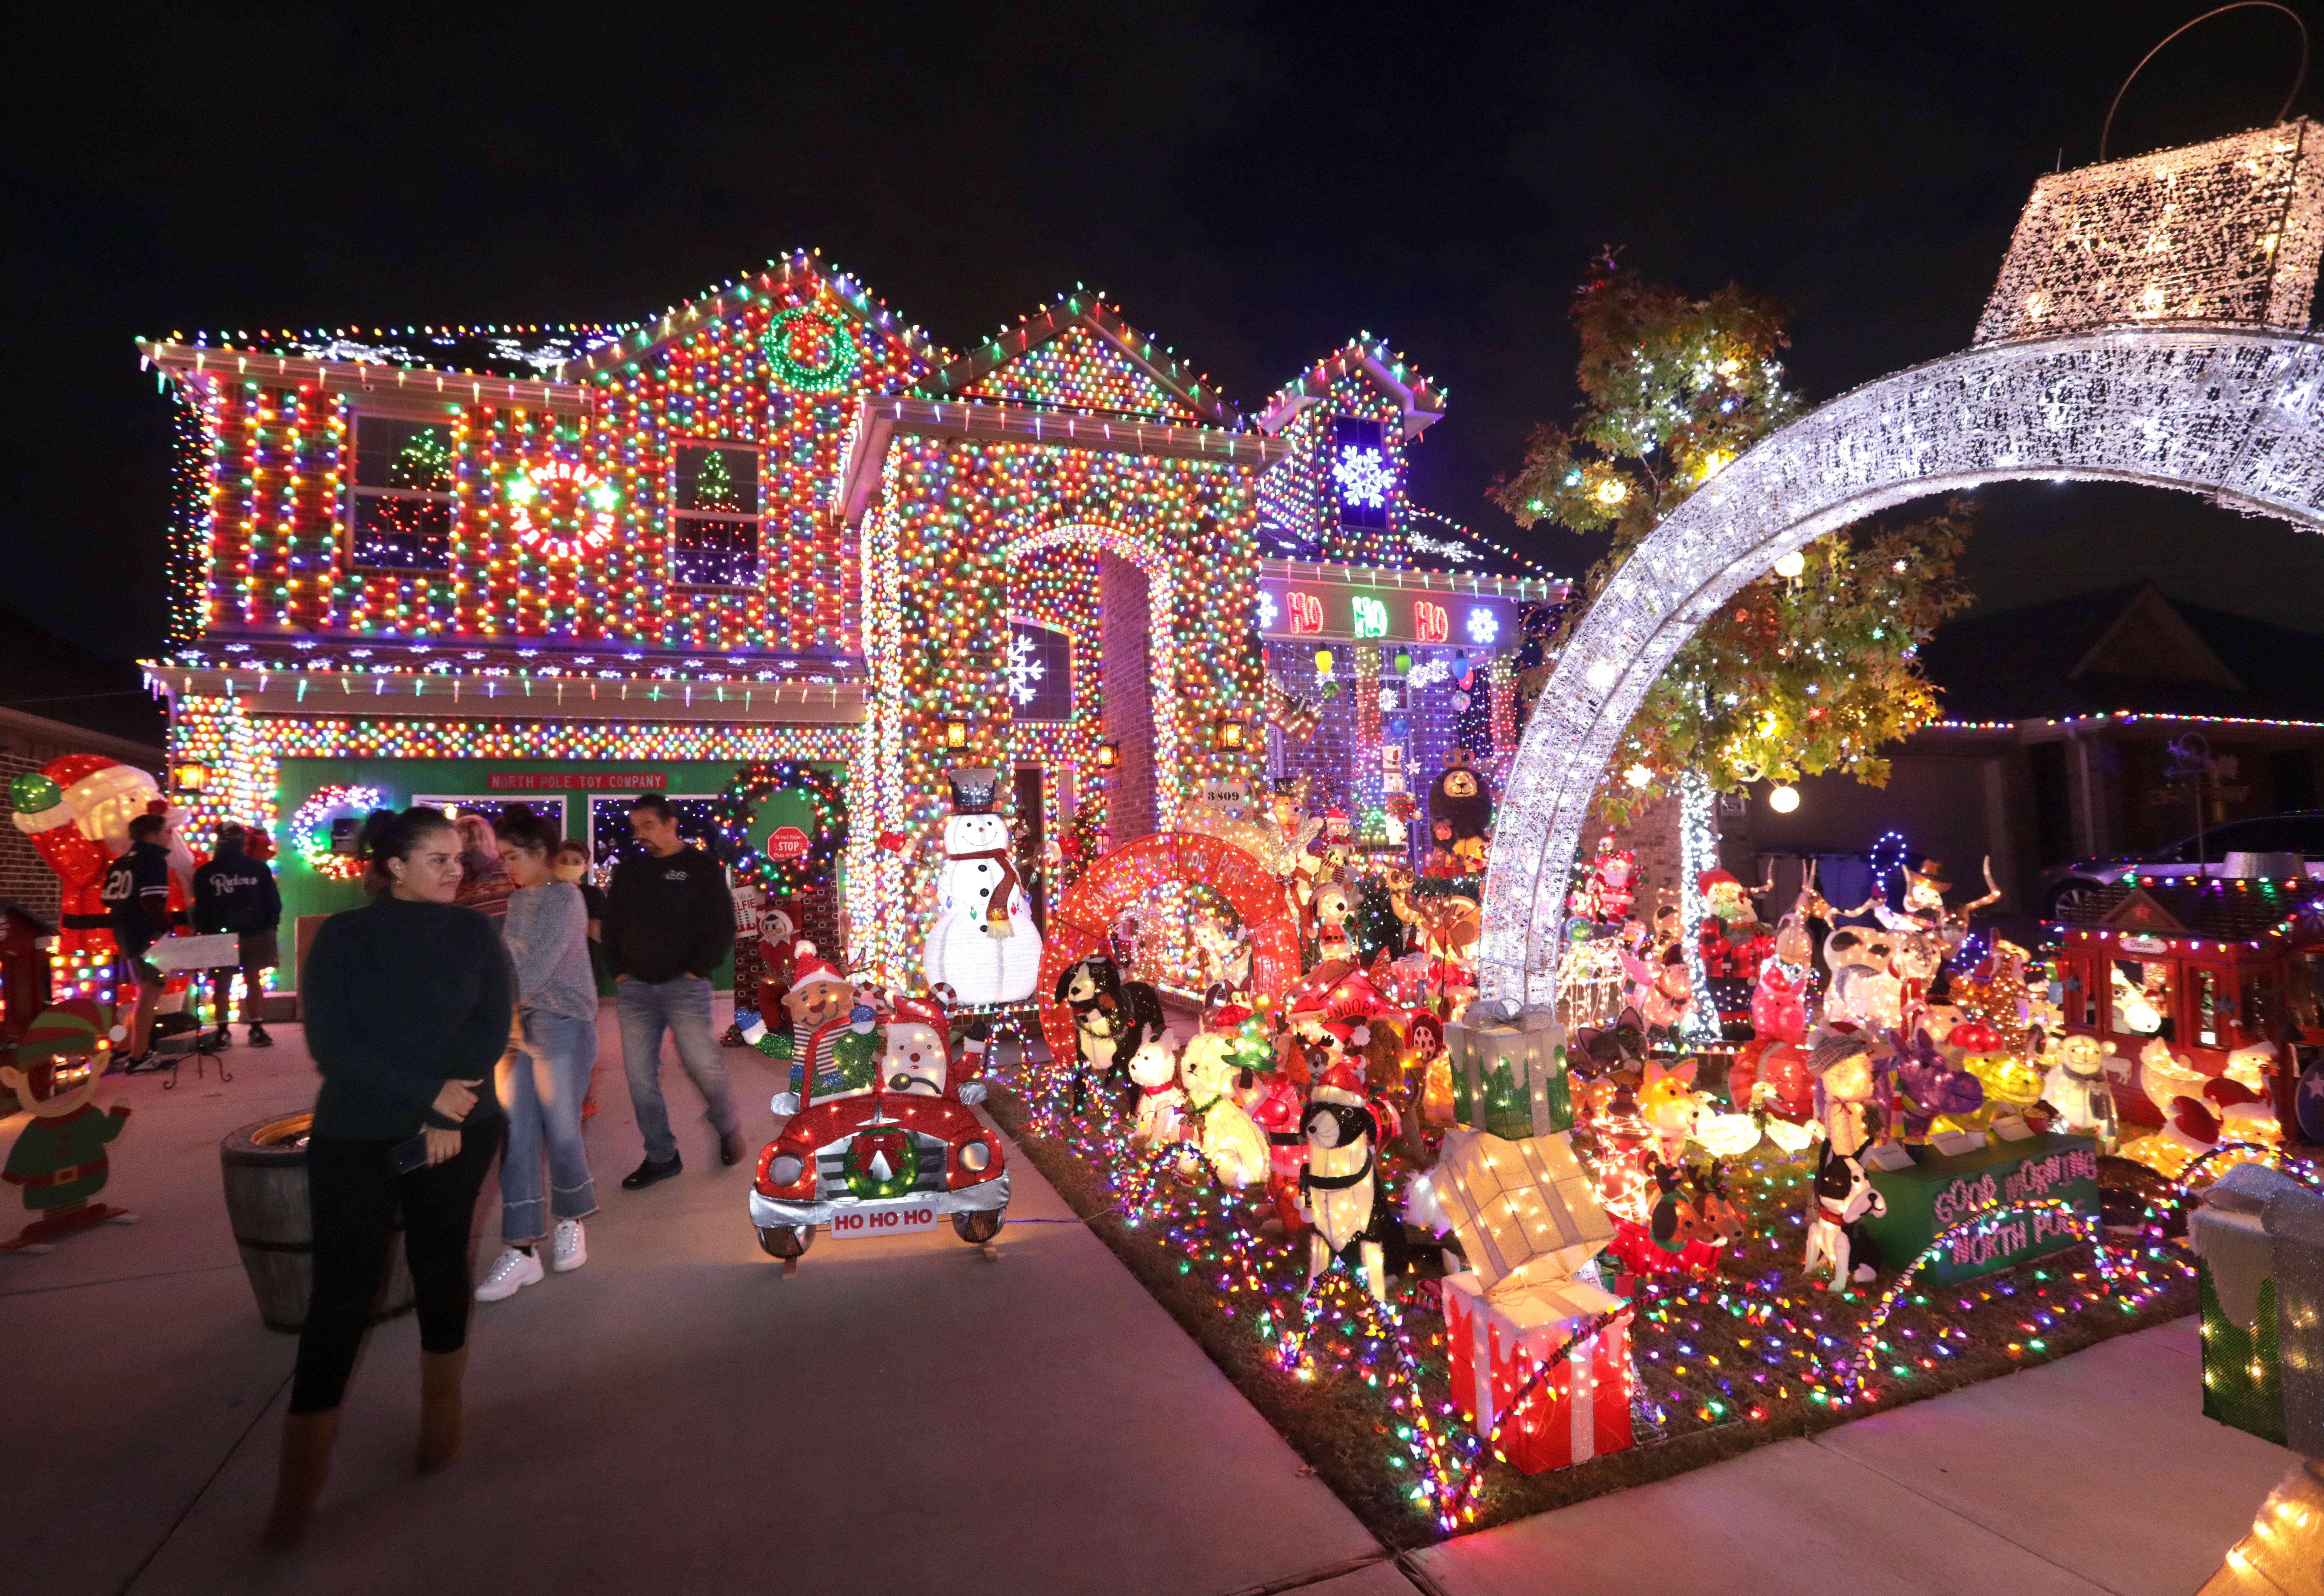 Where to find the neighborhood Christmas lights in Dallas or your